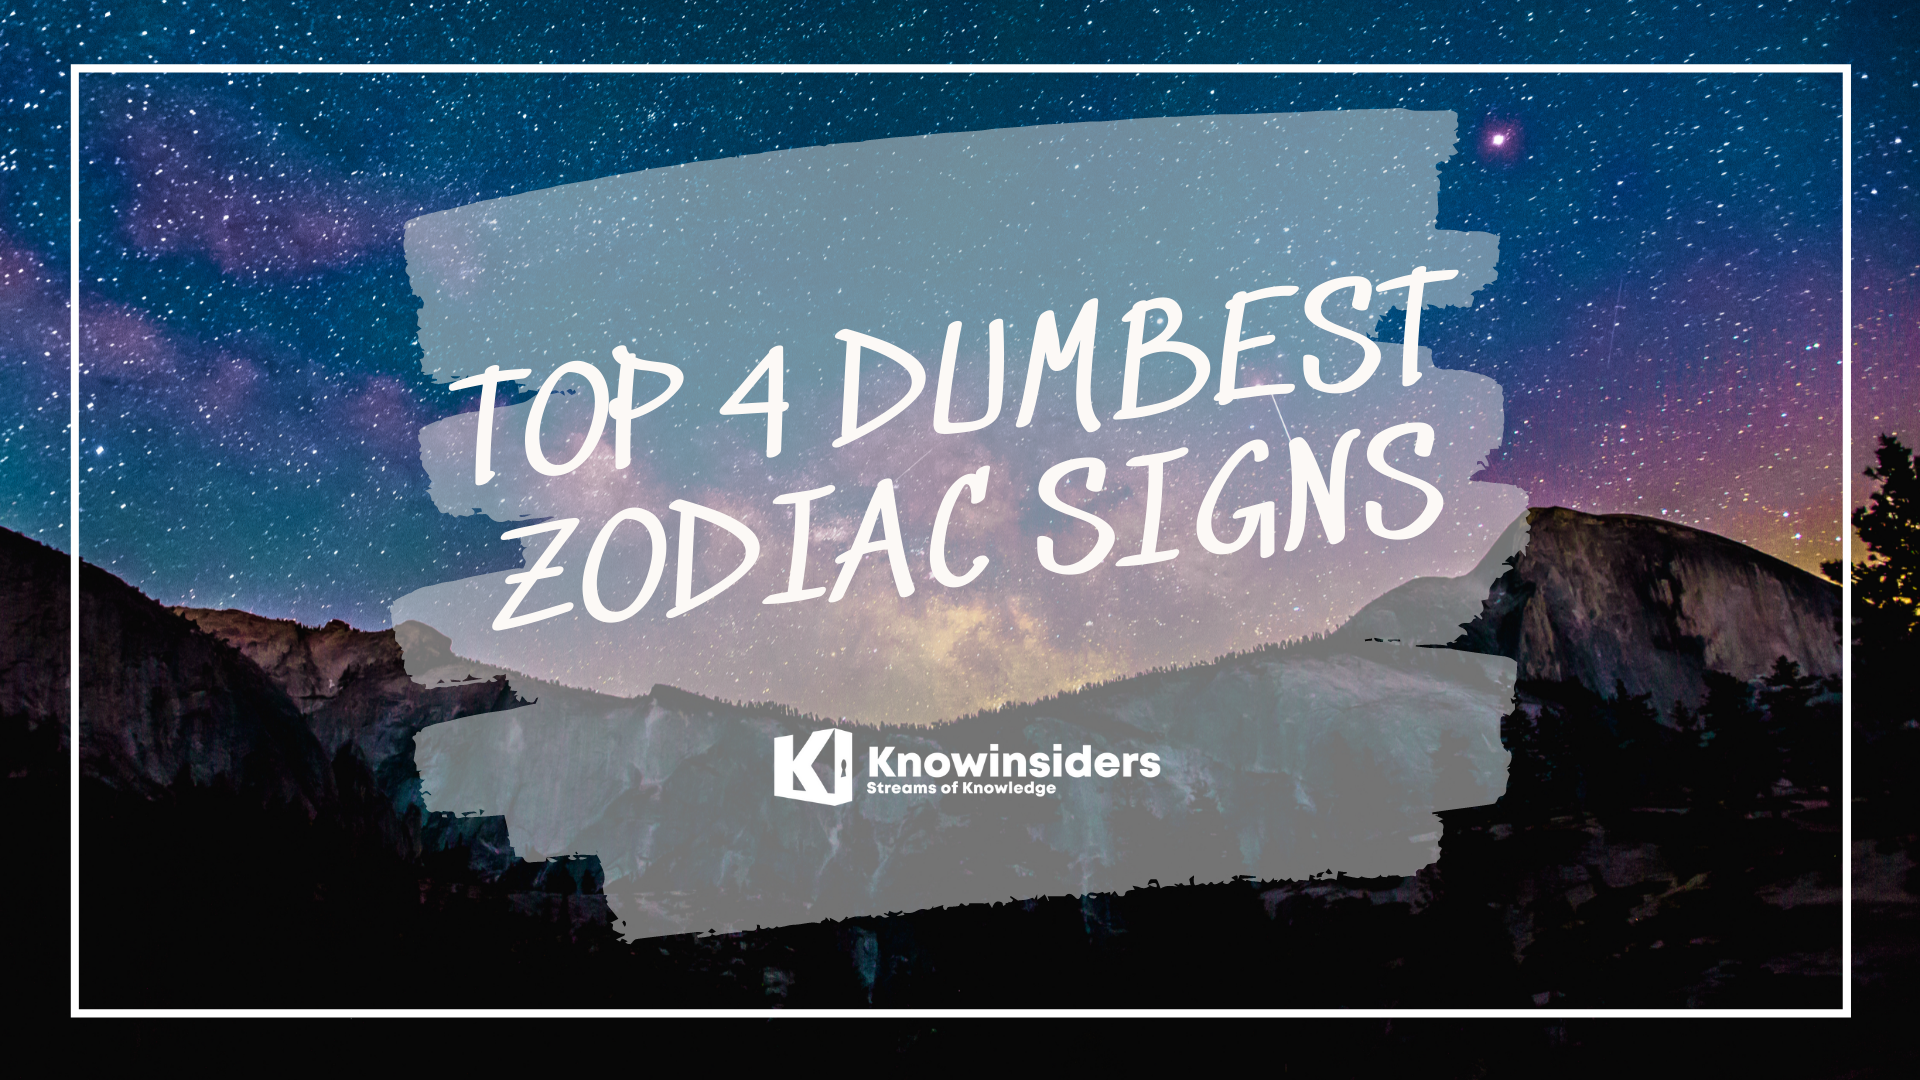 Top 4 Dumbest Zodiac Signs According To Astrology